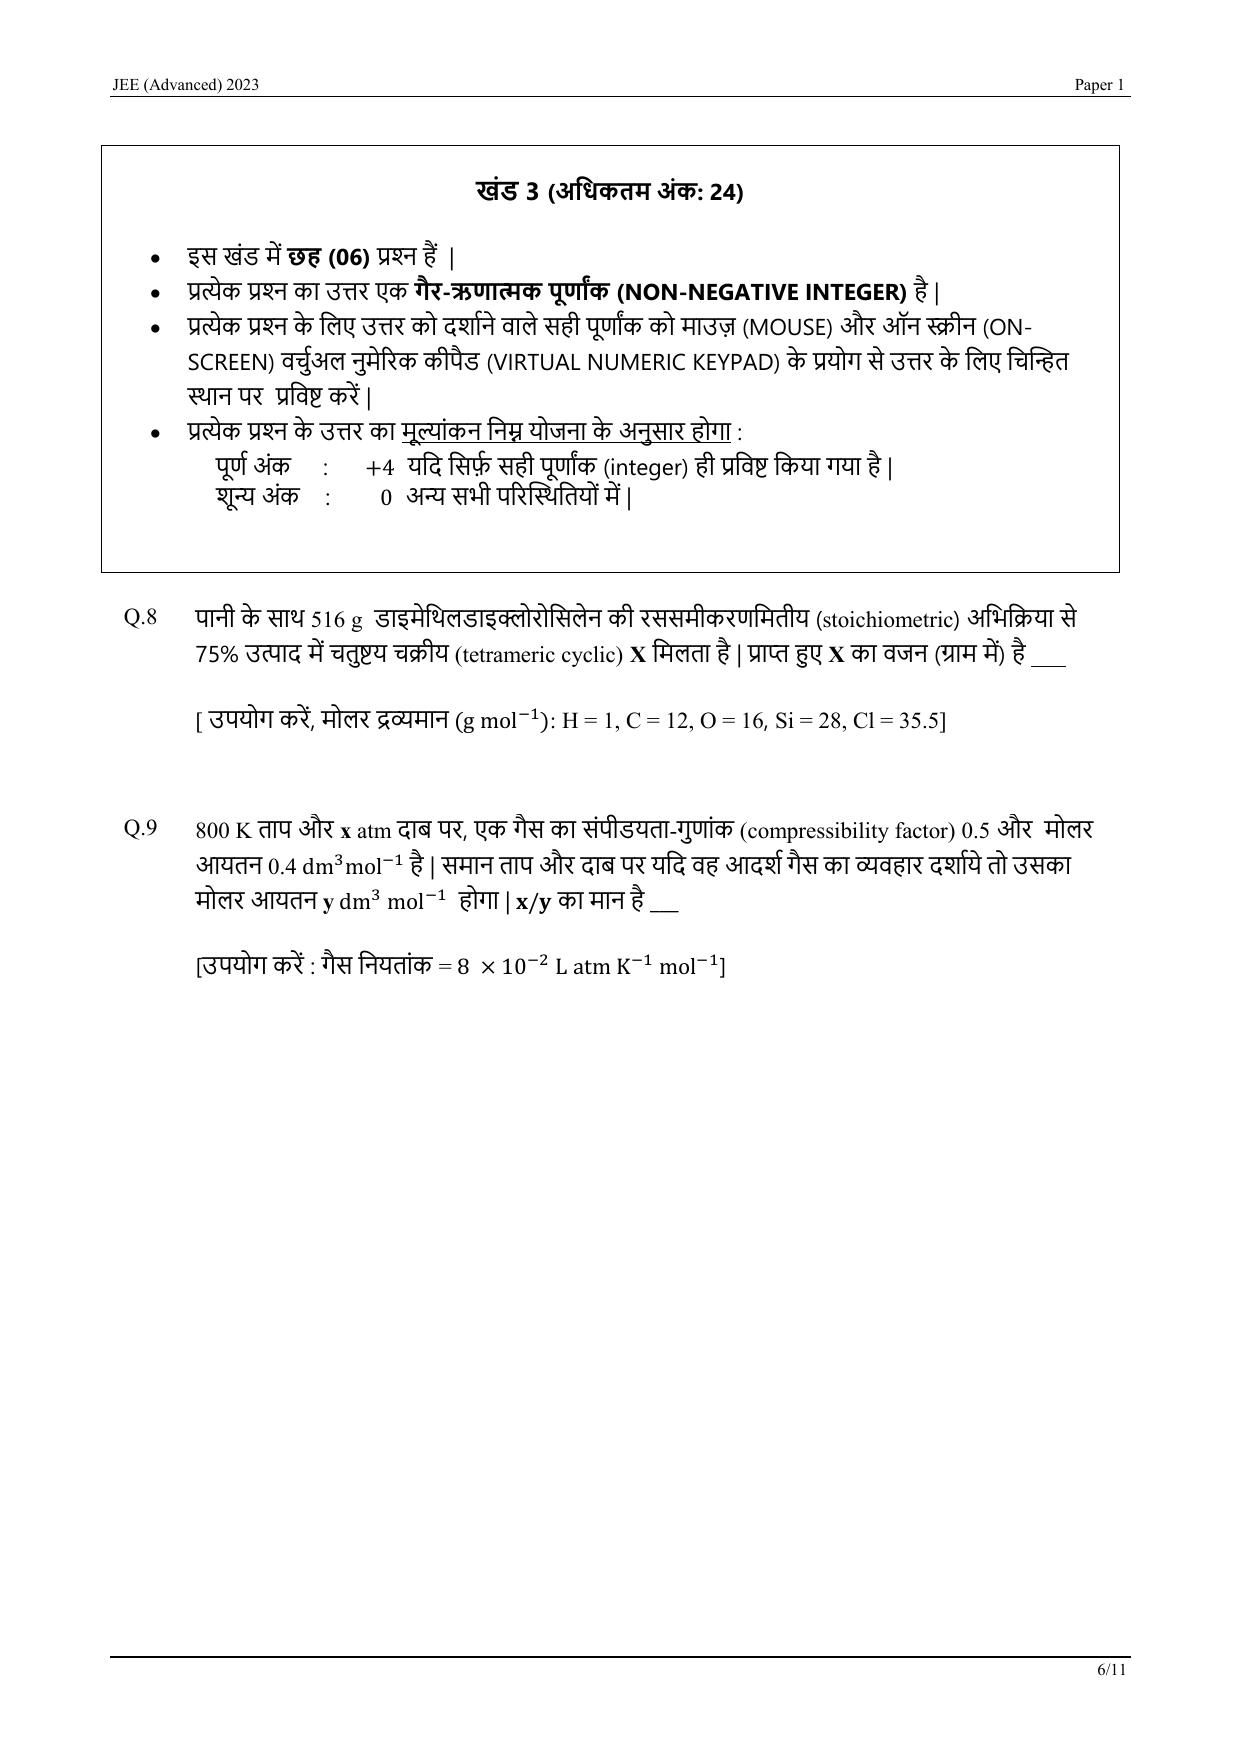 JEE Advanced 2023 Question Paper 1 (Hindi) - Page 26